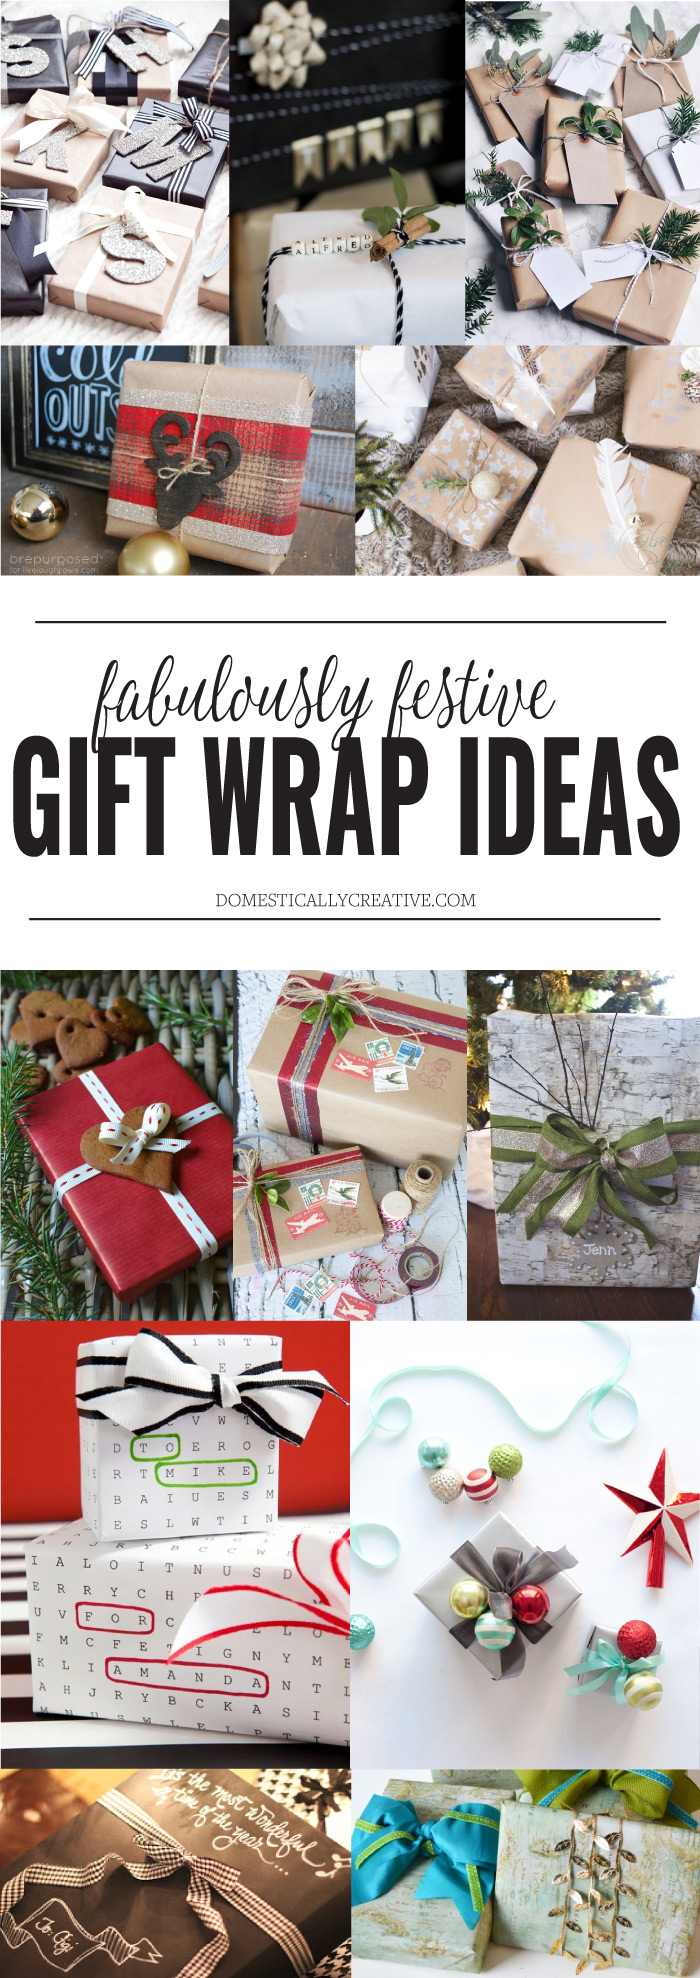 12 Fabulously Festive Gift Wrapping Ideas